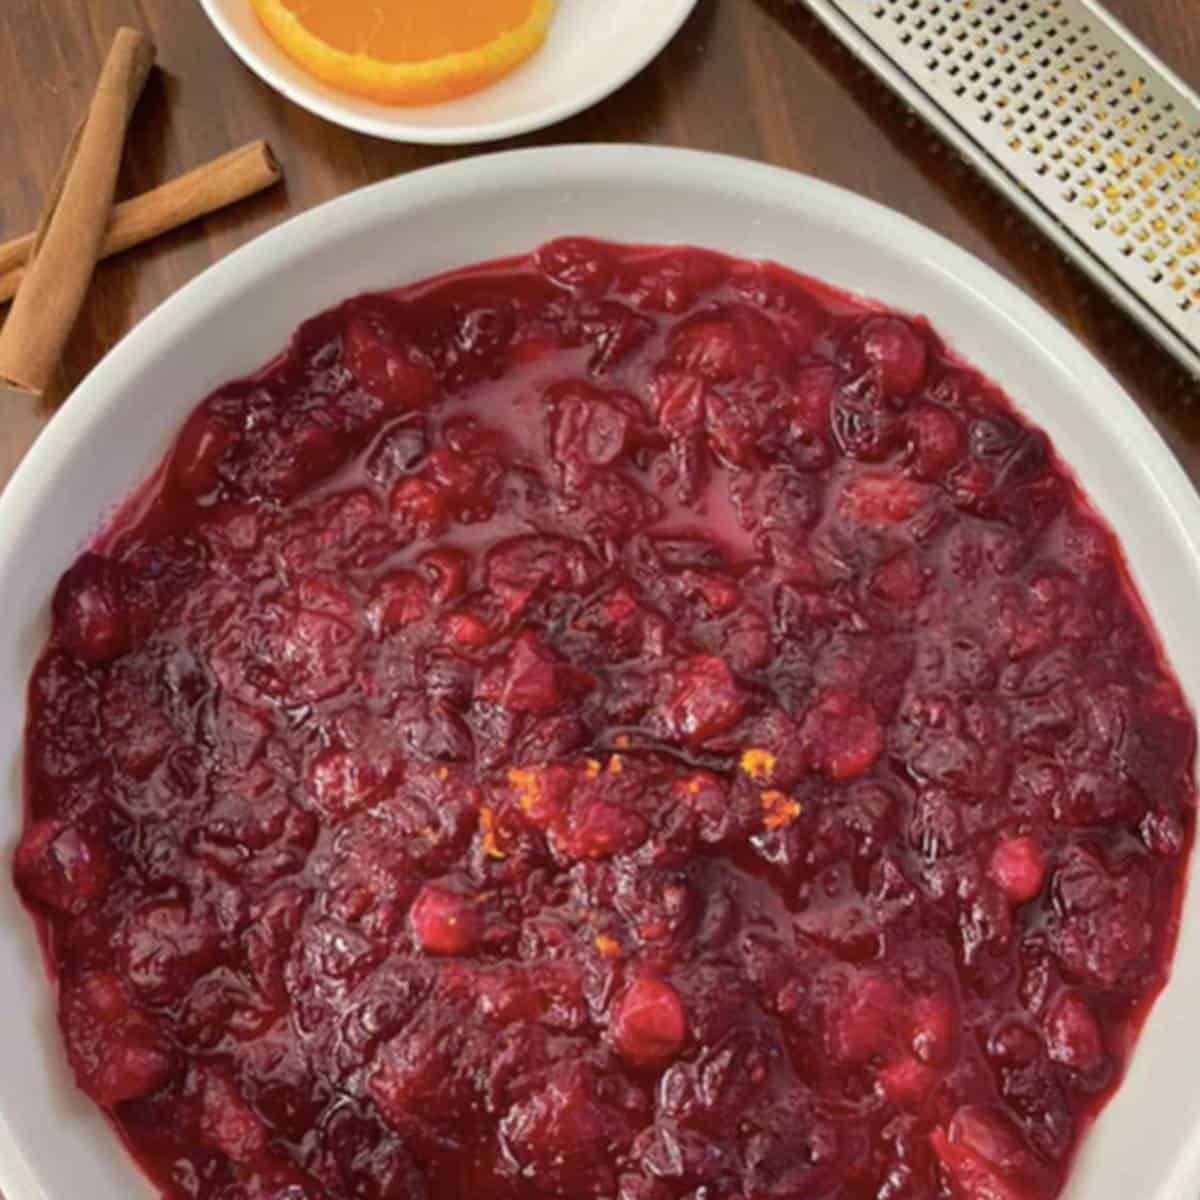 Cranberry Sauce is bowl with orange and cinnamon on side.